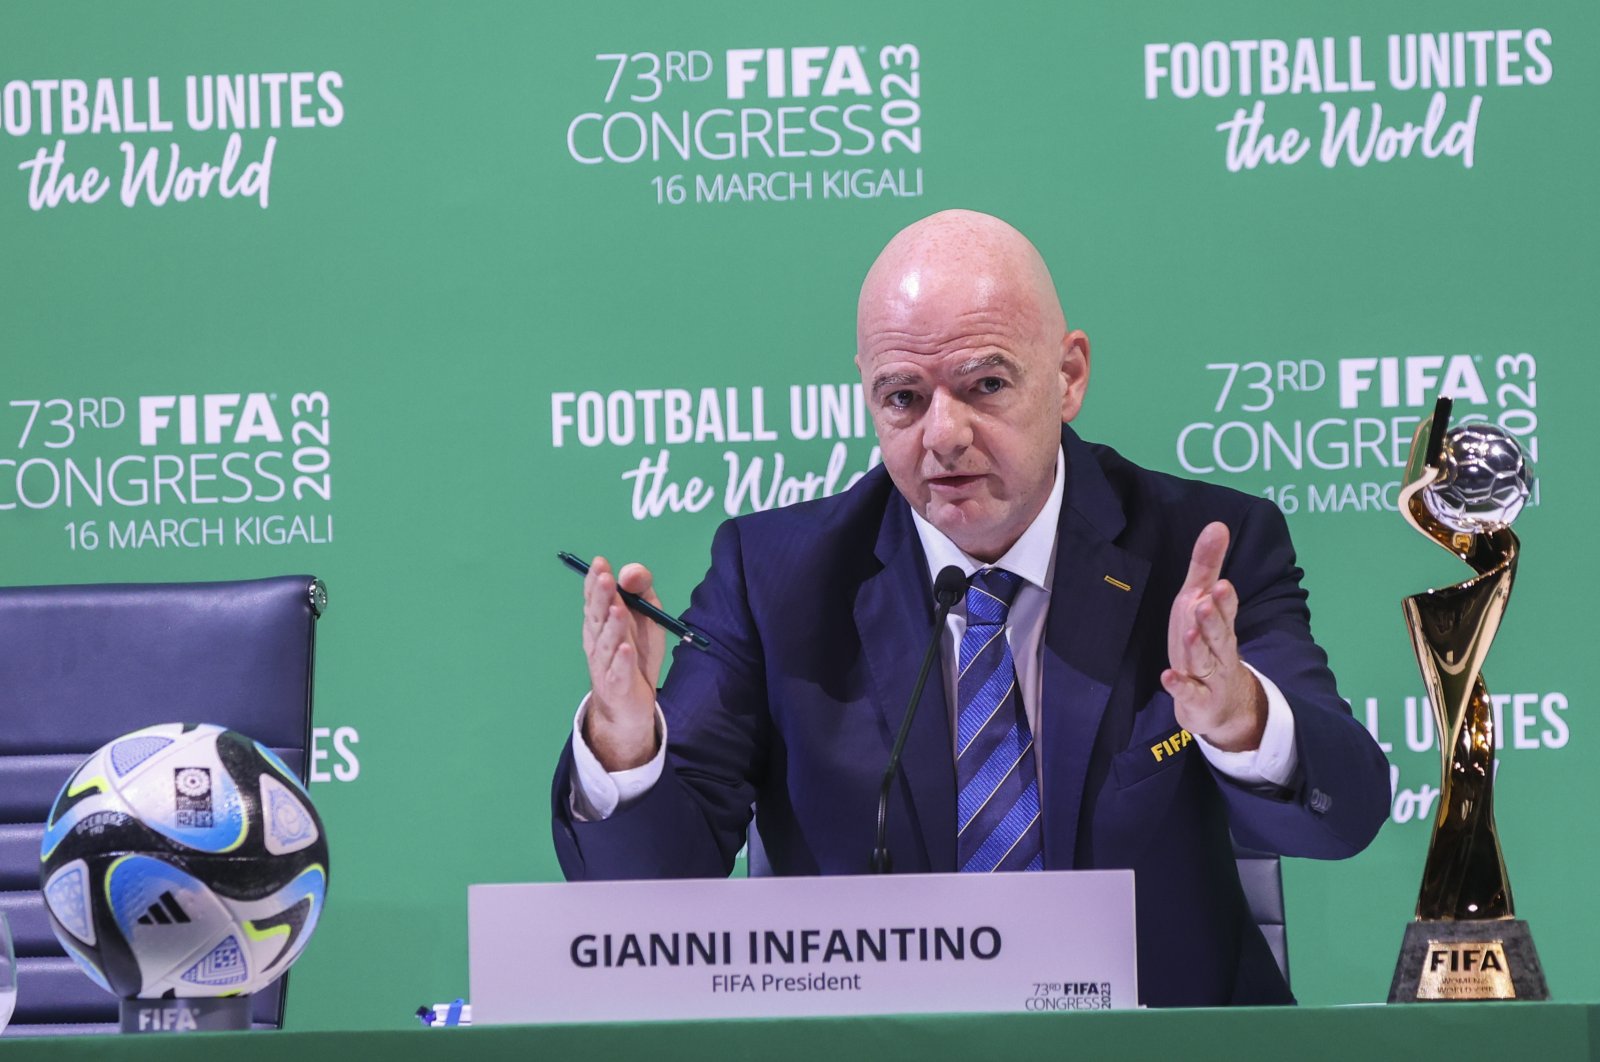  Newly reelected FIFA President Gianni Infantino, speak to the press at the 73rd FIFA Congress, Kigali, Rwanda, March 16, 2023. (AA Photo)